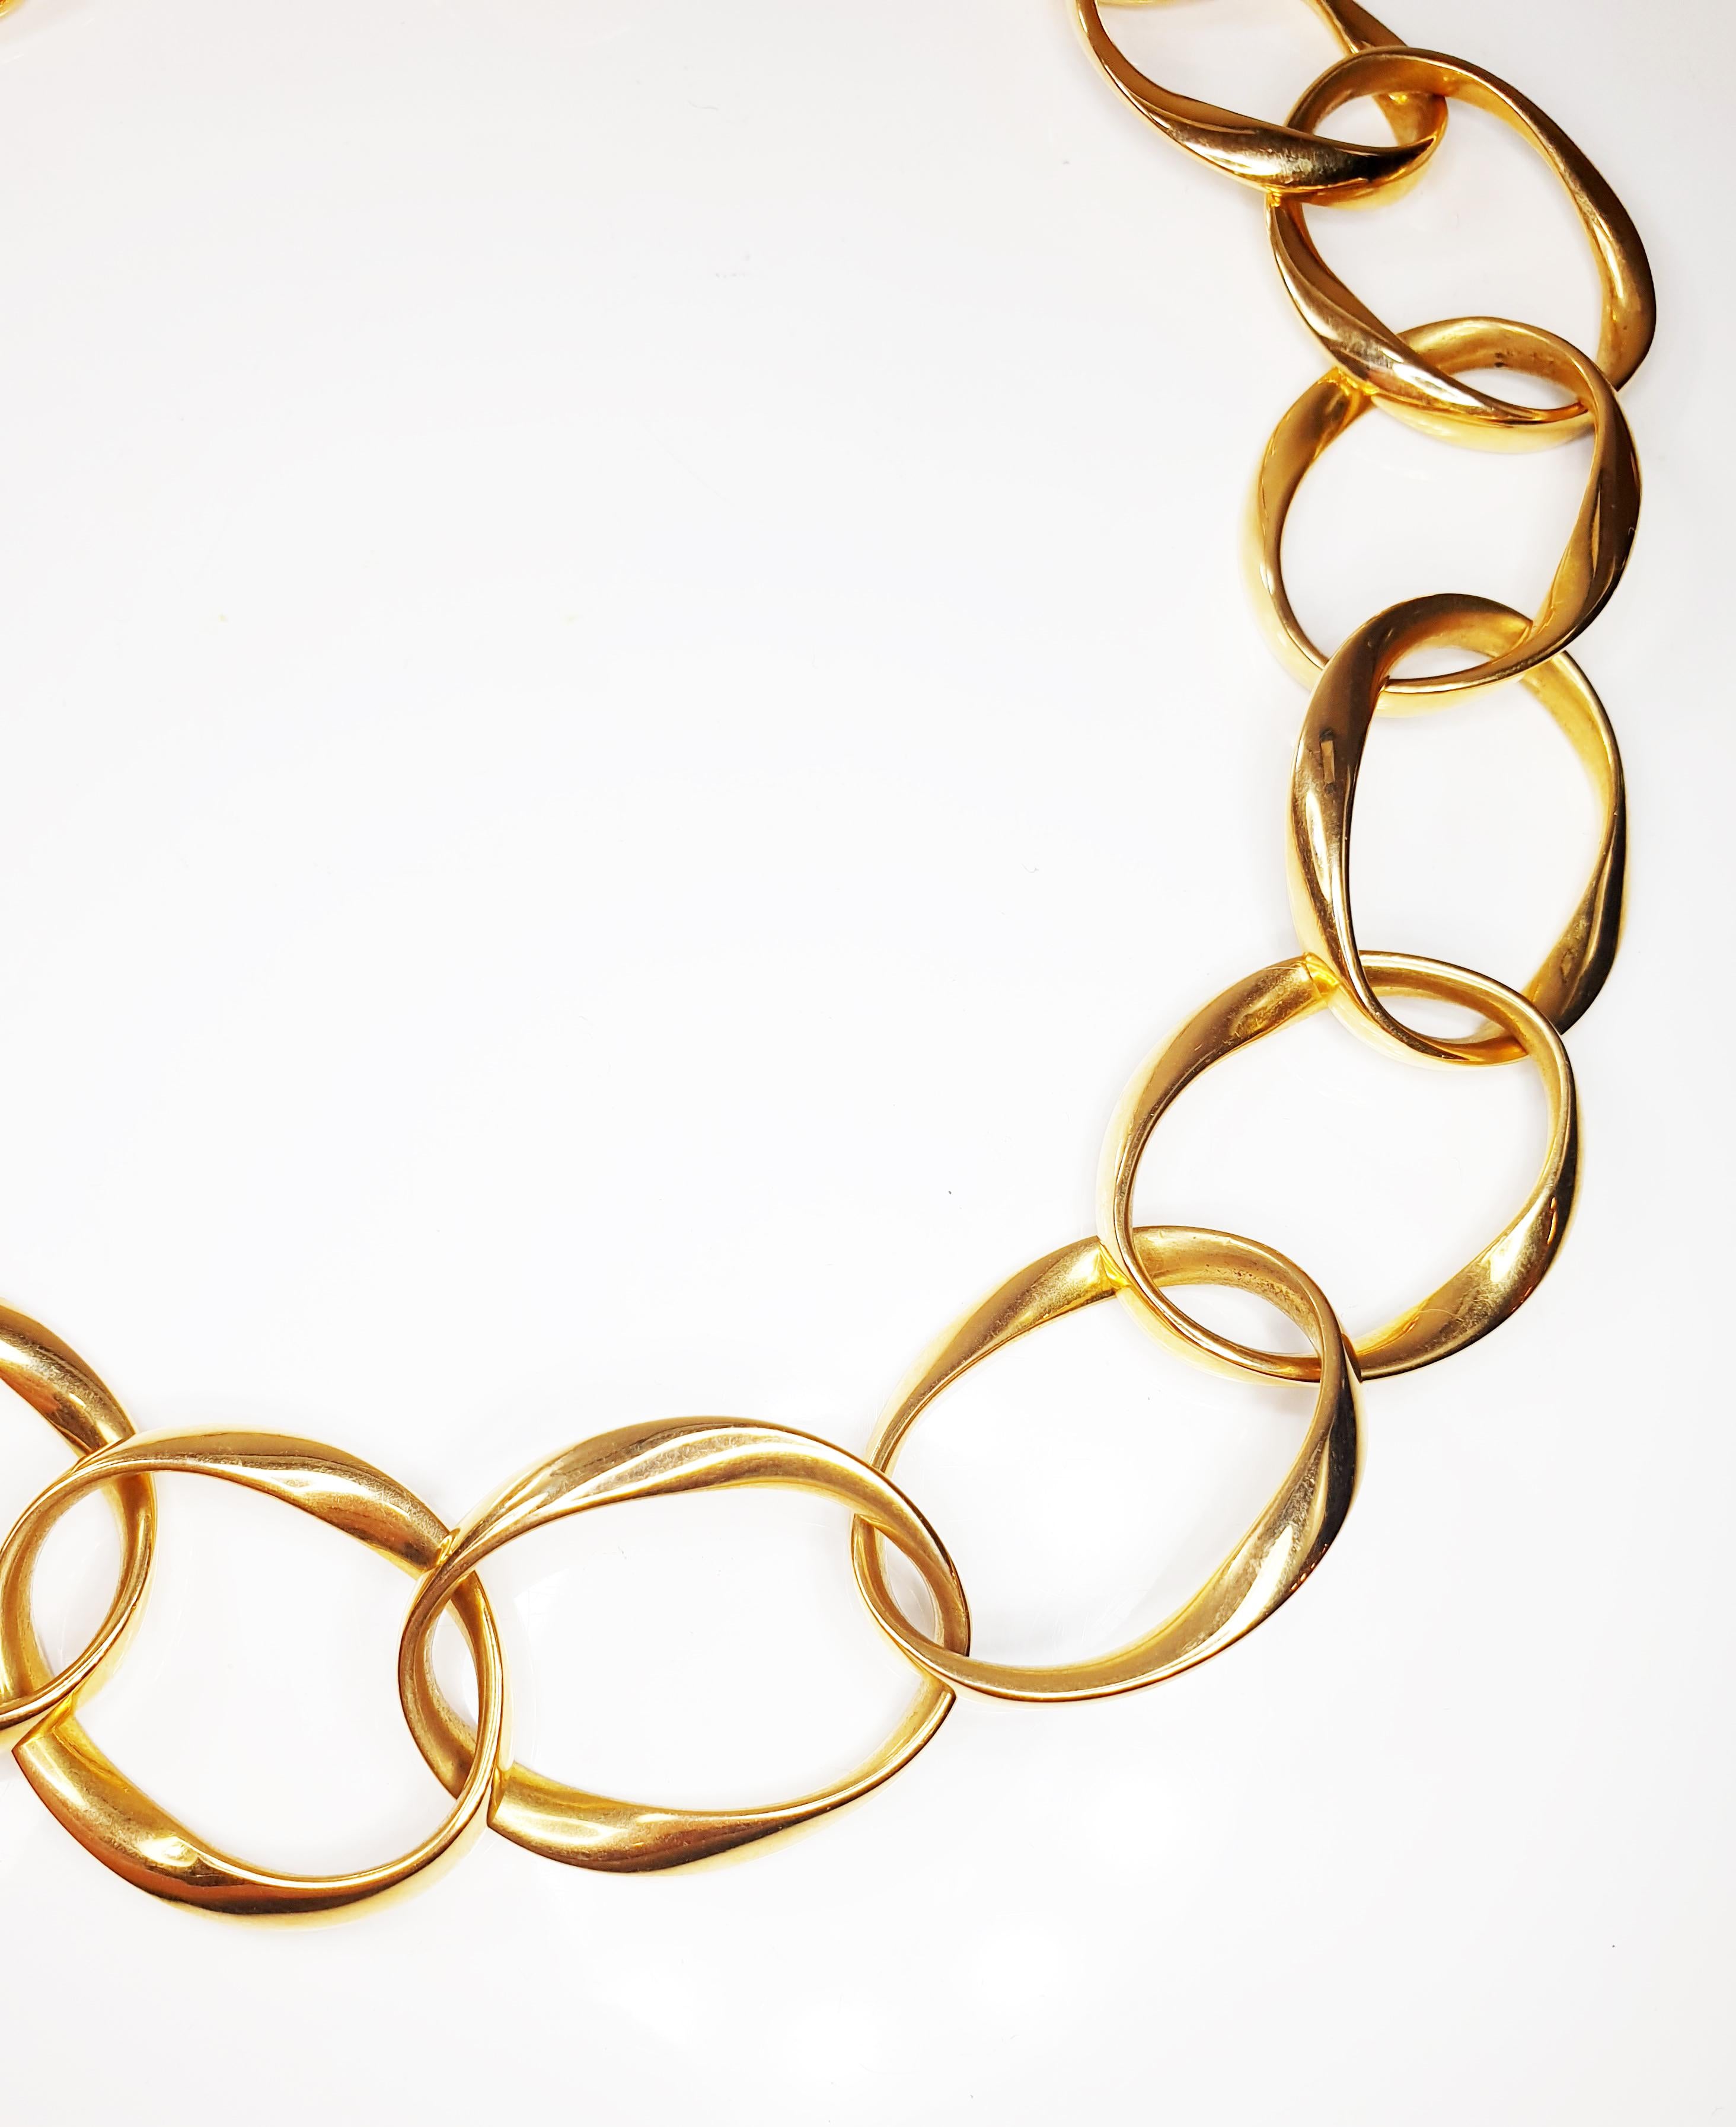 Mattioli Chips Necklace in 18k Rose Gold 
Chips Jewels inspired by the sinuous movements of nature the collection evokes the ancient Italian goldsmith’s craftsmanship and includes chokers, bracelets and rings handcrafted to create an elegant wavy